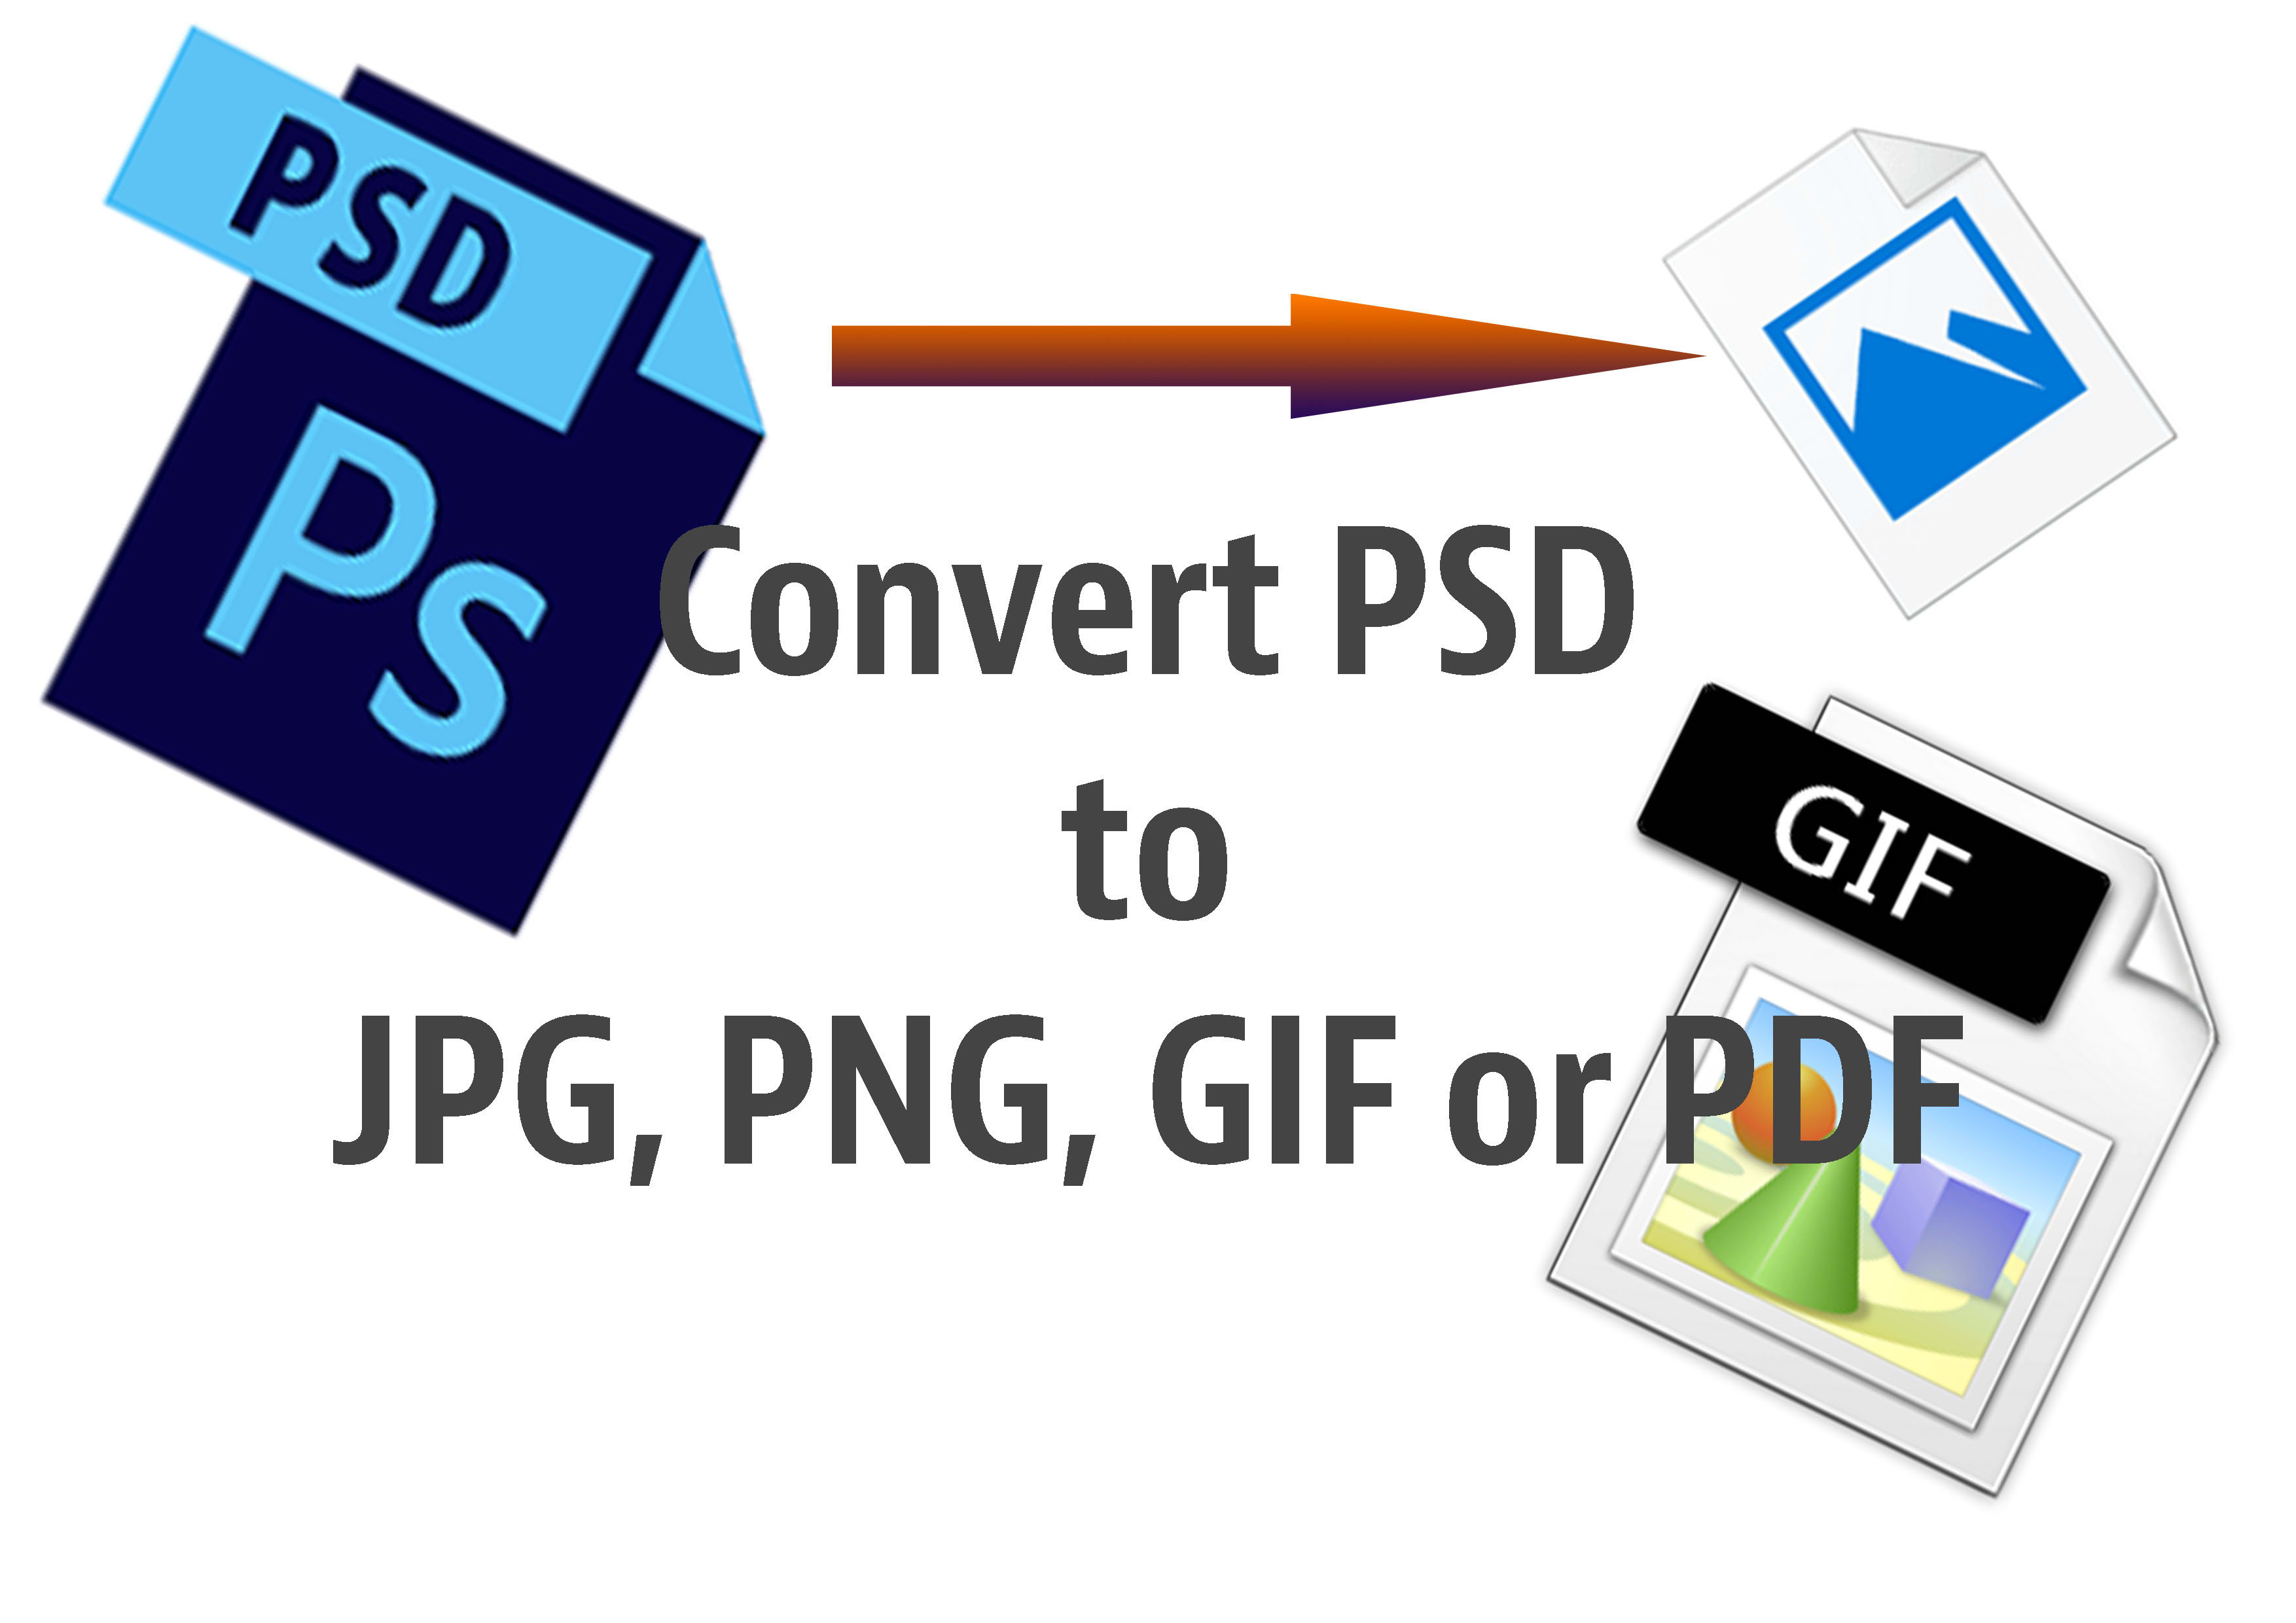 Convert A Psd File To A Jpg Png Gif Or Pdf File By Amethyst6 Fiverr